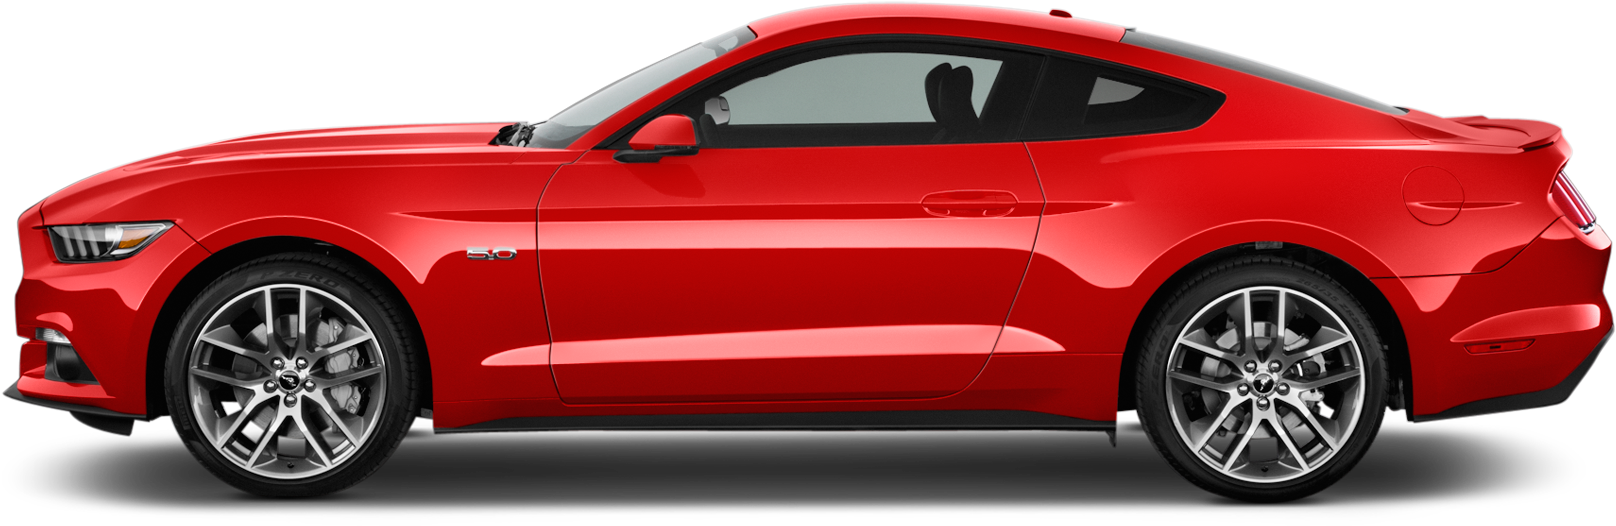 Side View Of A Red Car